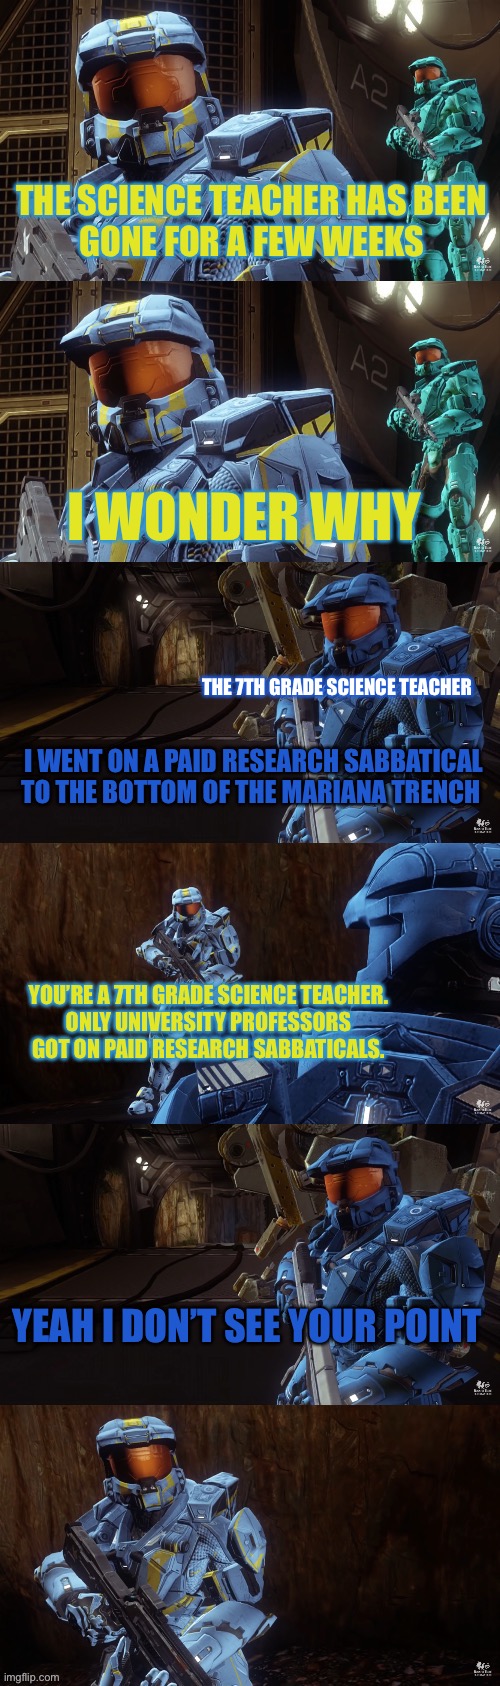 Based on an interaction between me/my classmates and my science teacher in 7th grade | THE SCIENCE TEACHER HAS BEEN
GONE FOR A FEW WEEKS; I WONDER WHY; THE 7TH GRADE SCIENCE TEACHER; I WENT ON A PAID RESEARCH SABBATICAL TO THE BOTTOM OF THE MARIANA TRENCH; YOU’RE A 7TH GRADE SCIENCE TEACHER.
ONLY UNIVERSITY PROFESSORS GOT ON PAID RESEARCH SABBATICALS. YEAH I DON’T SEE YOUR POINT | image tagged in yeah i don't see your point,red vs blue,caboose,rvb,agent washington,my 7th grade science teacher | made w/ Imgflip meme maker